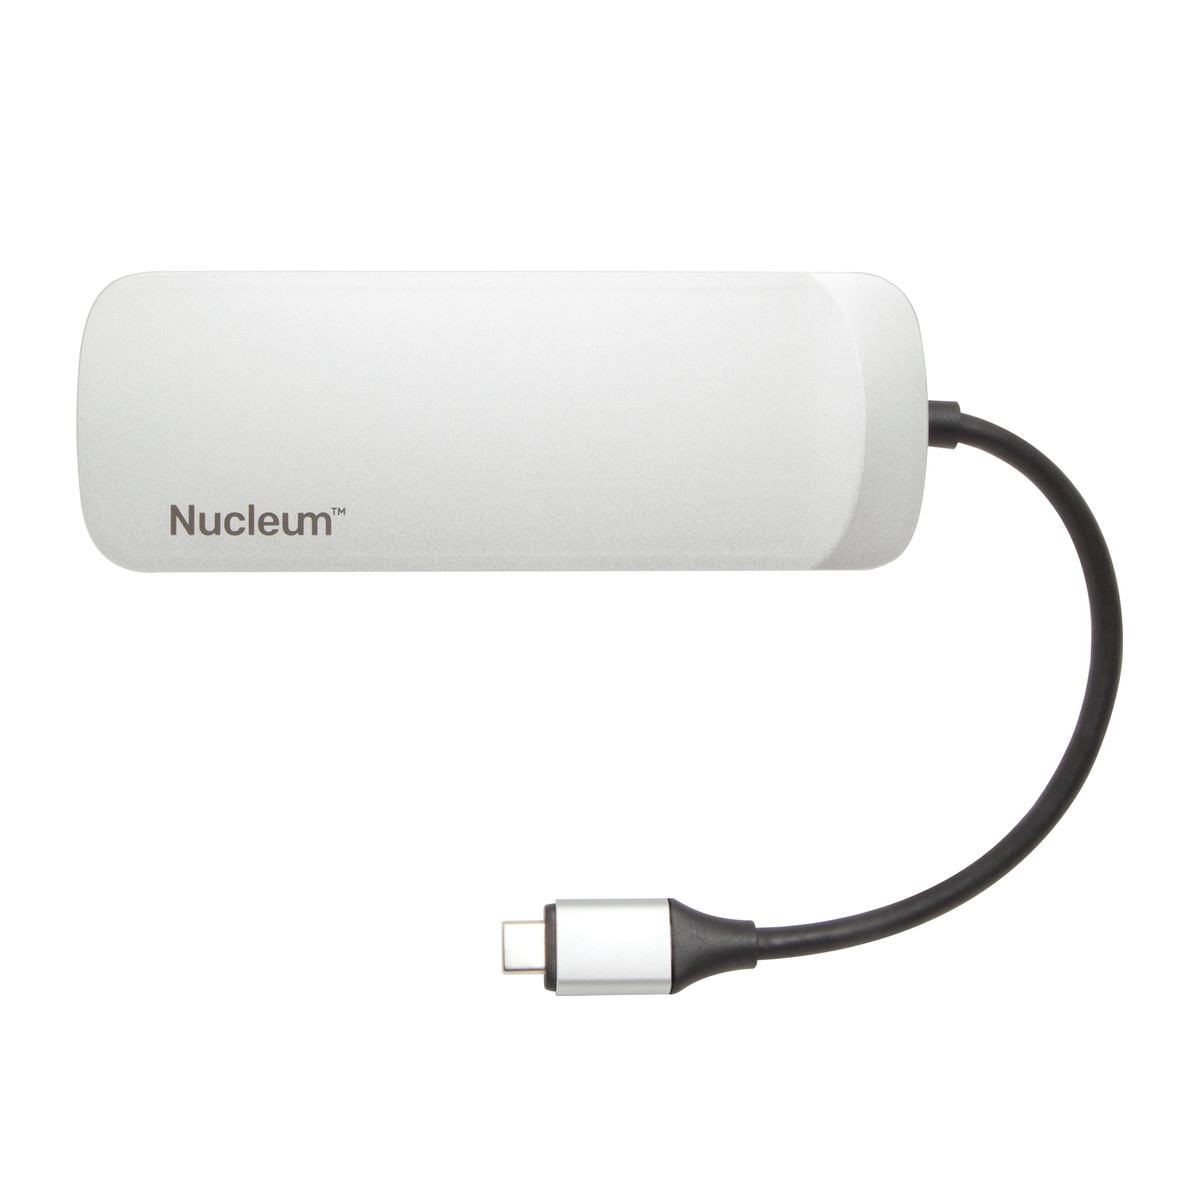 Kingston Nucleum 7-in-1 USB 3.0 Type-C Adapter Hub, 4K HDMI, SD and MicroSD Card, USB Type-C Charging for MacBook, Chromebook, and Other USB Type-C devices - image 1 of 2